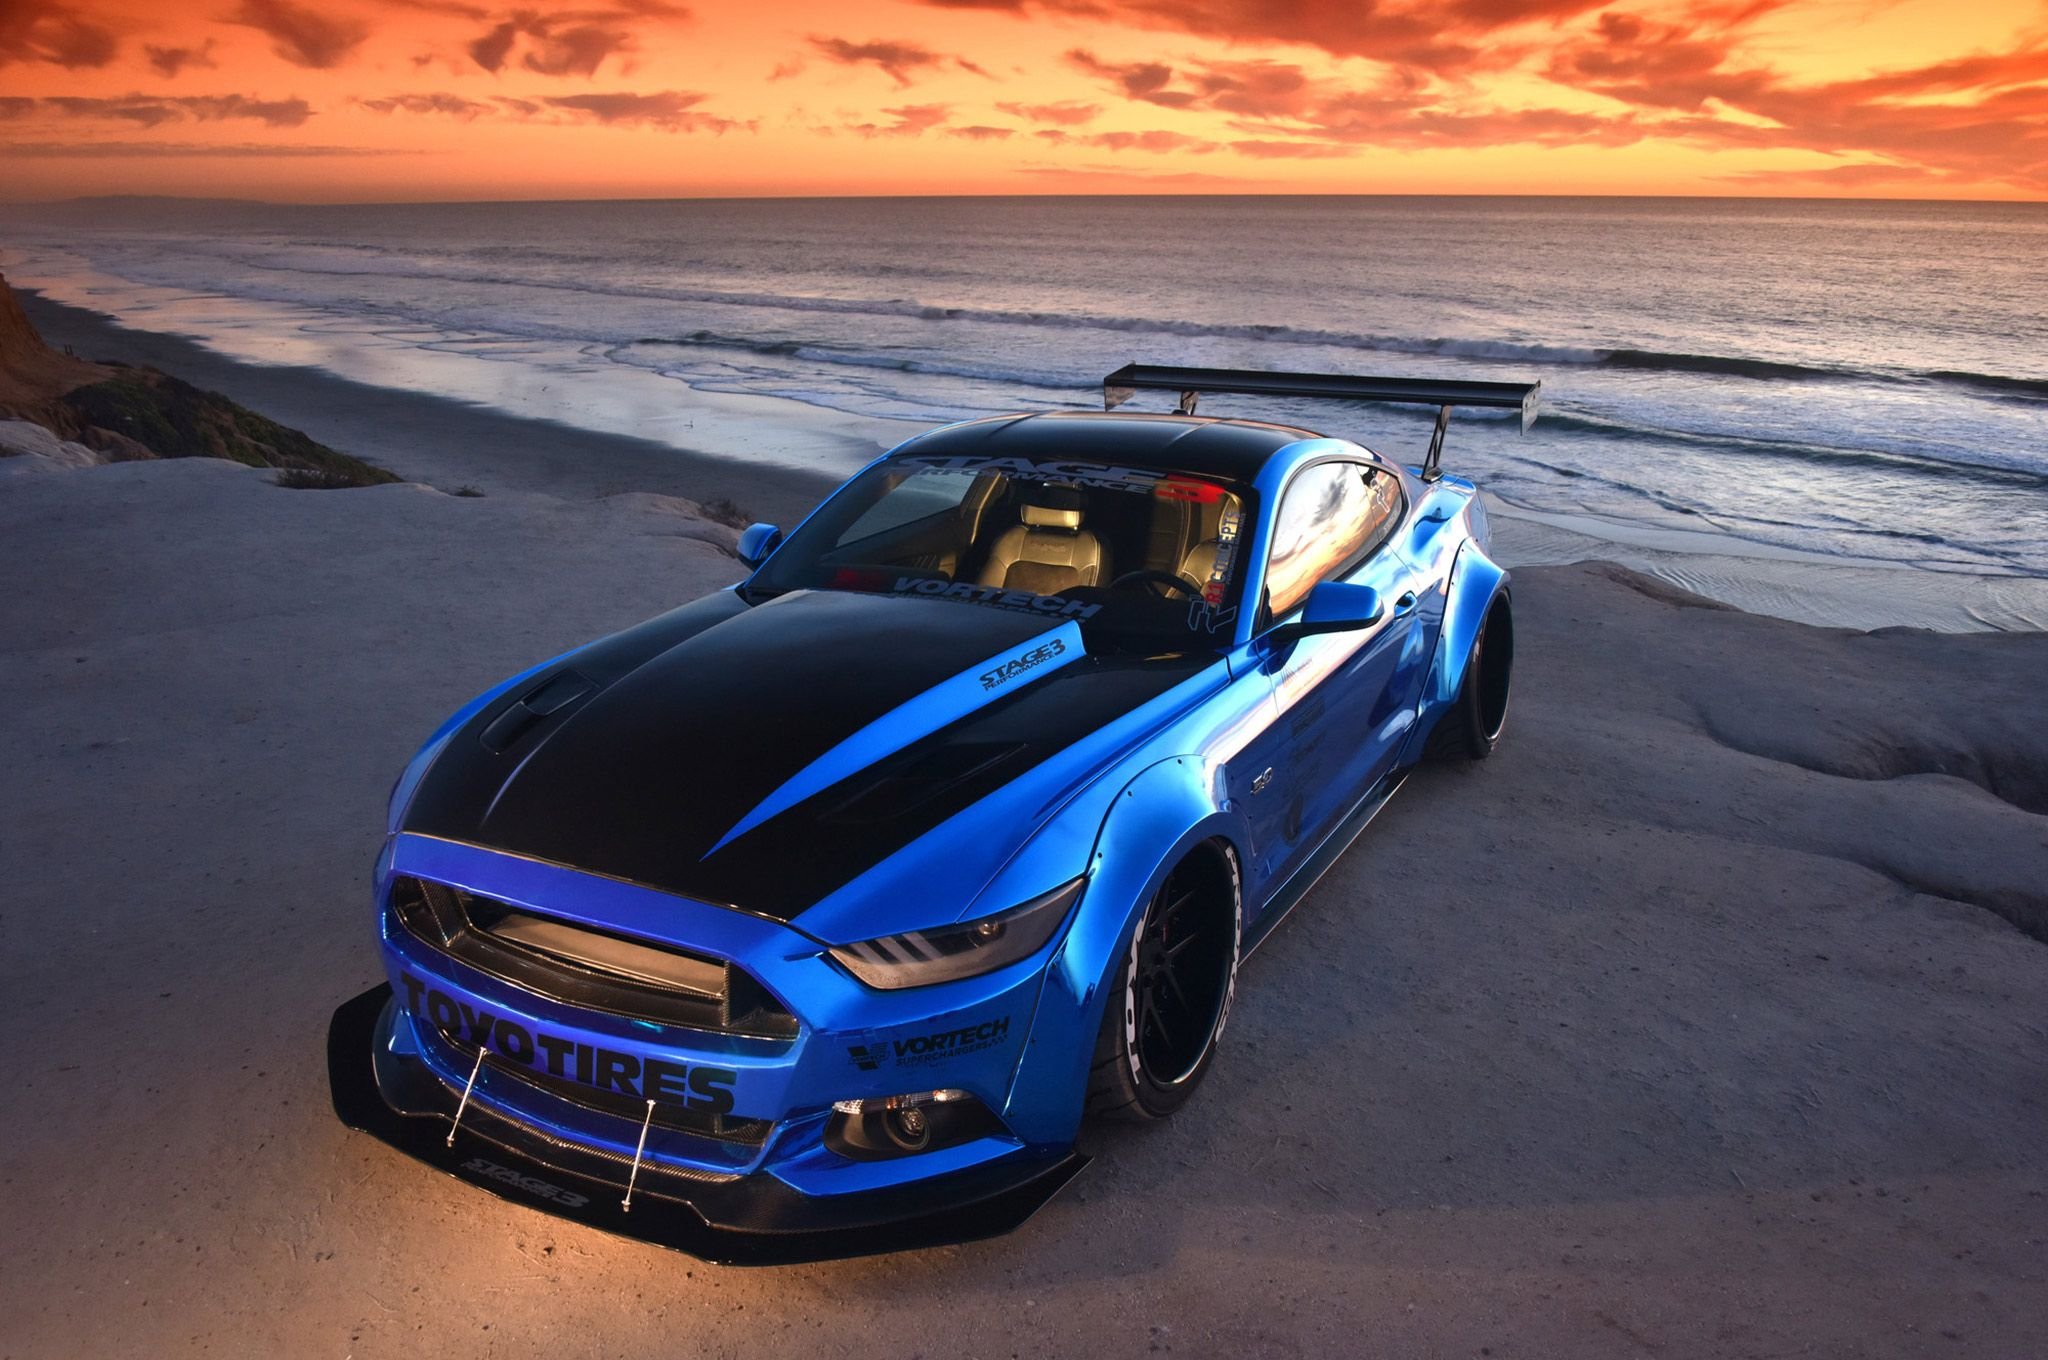 2015, S550, Ford, Mustang, Drift, Race, Racing, Muscle, Hot, Rod, Rods